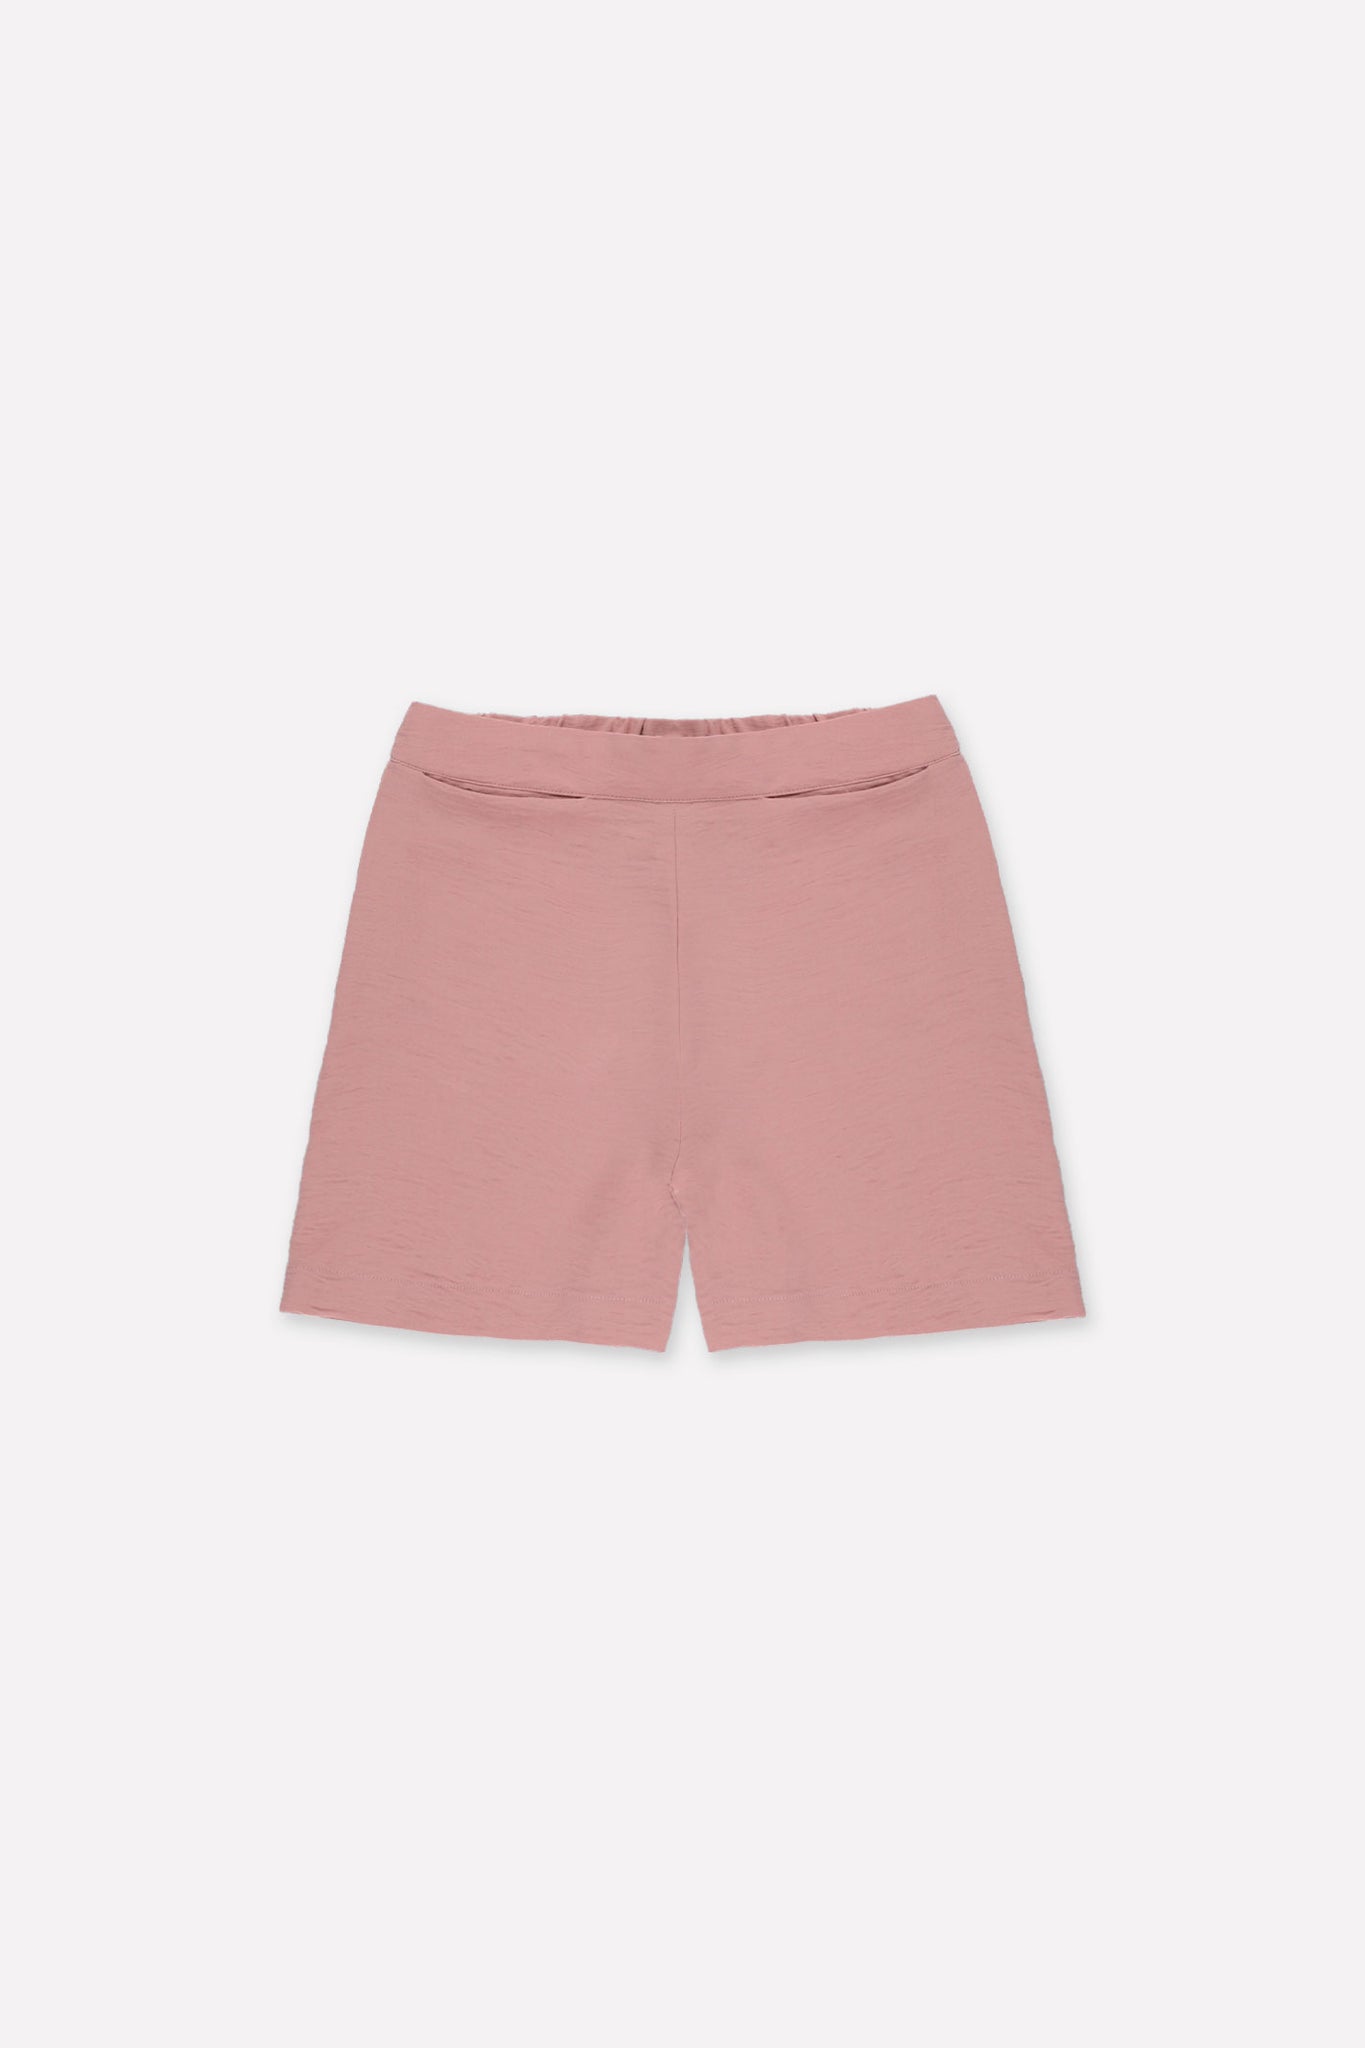 L.1195 - MOTION SHORTS - Dusty Pink